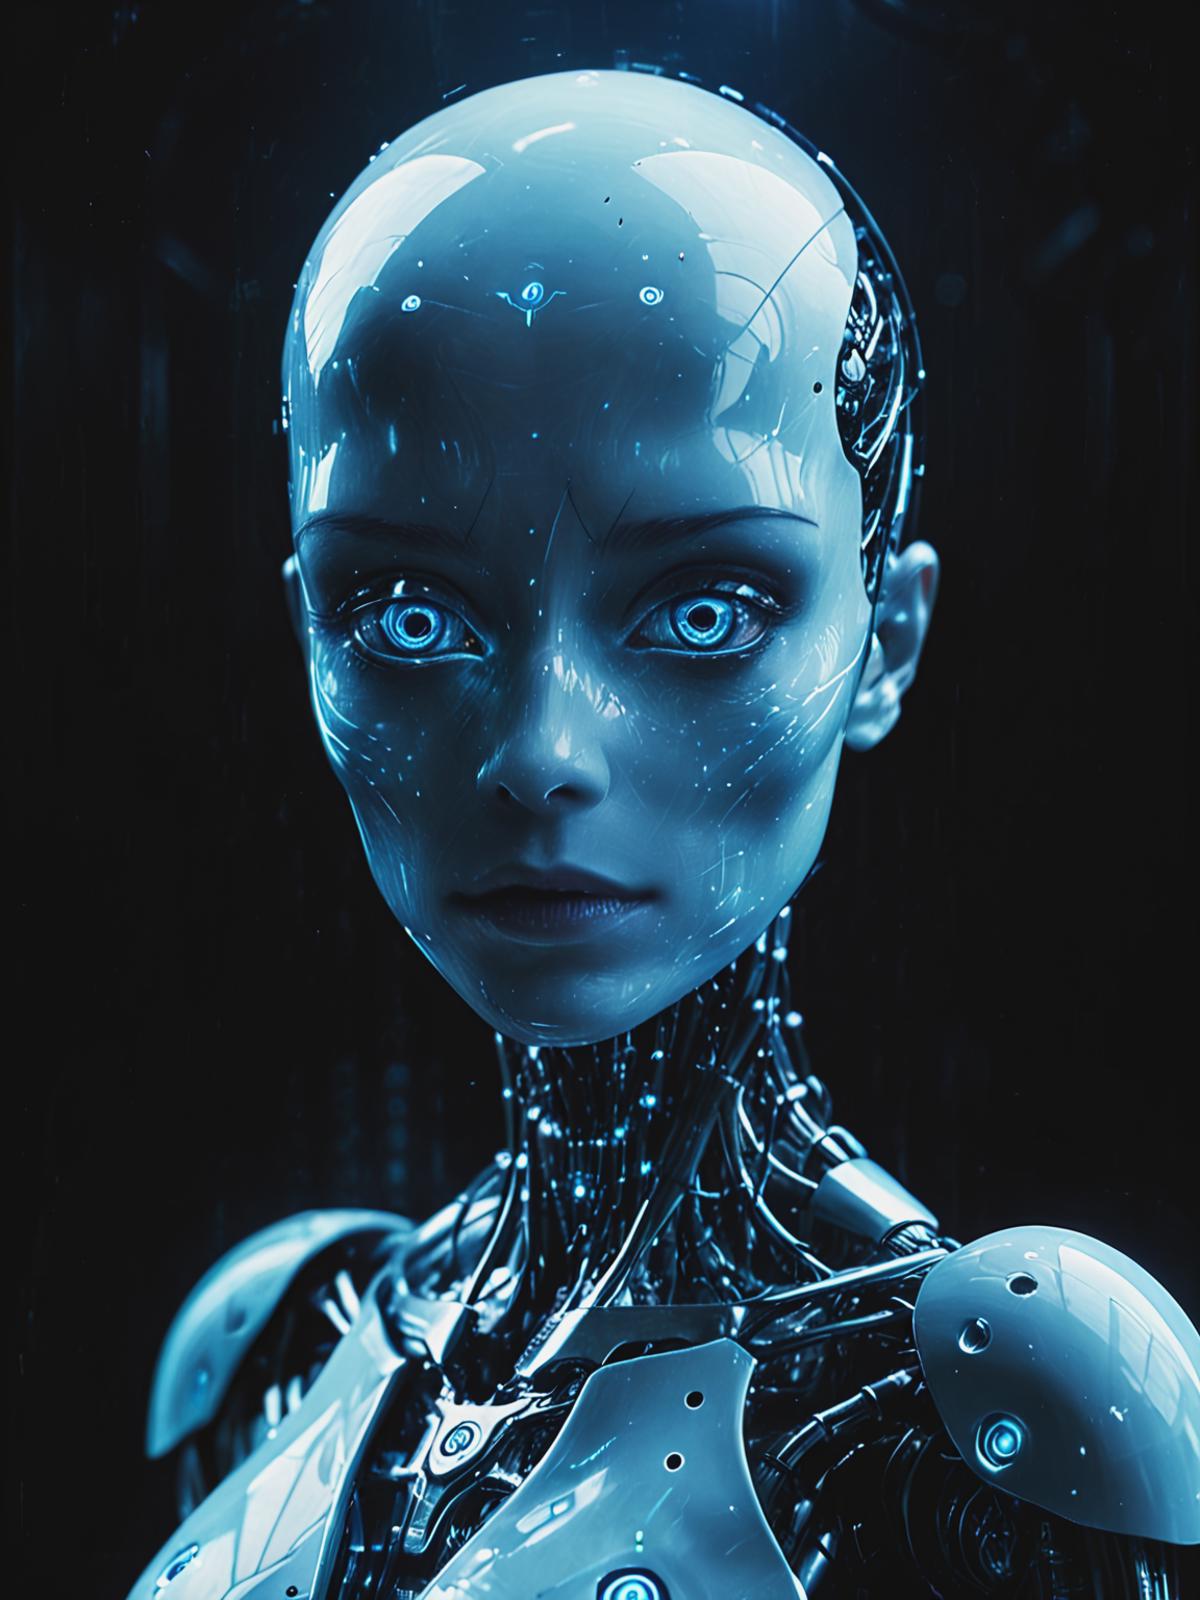 AI model image by foxm131249